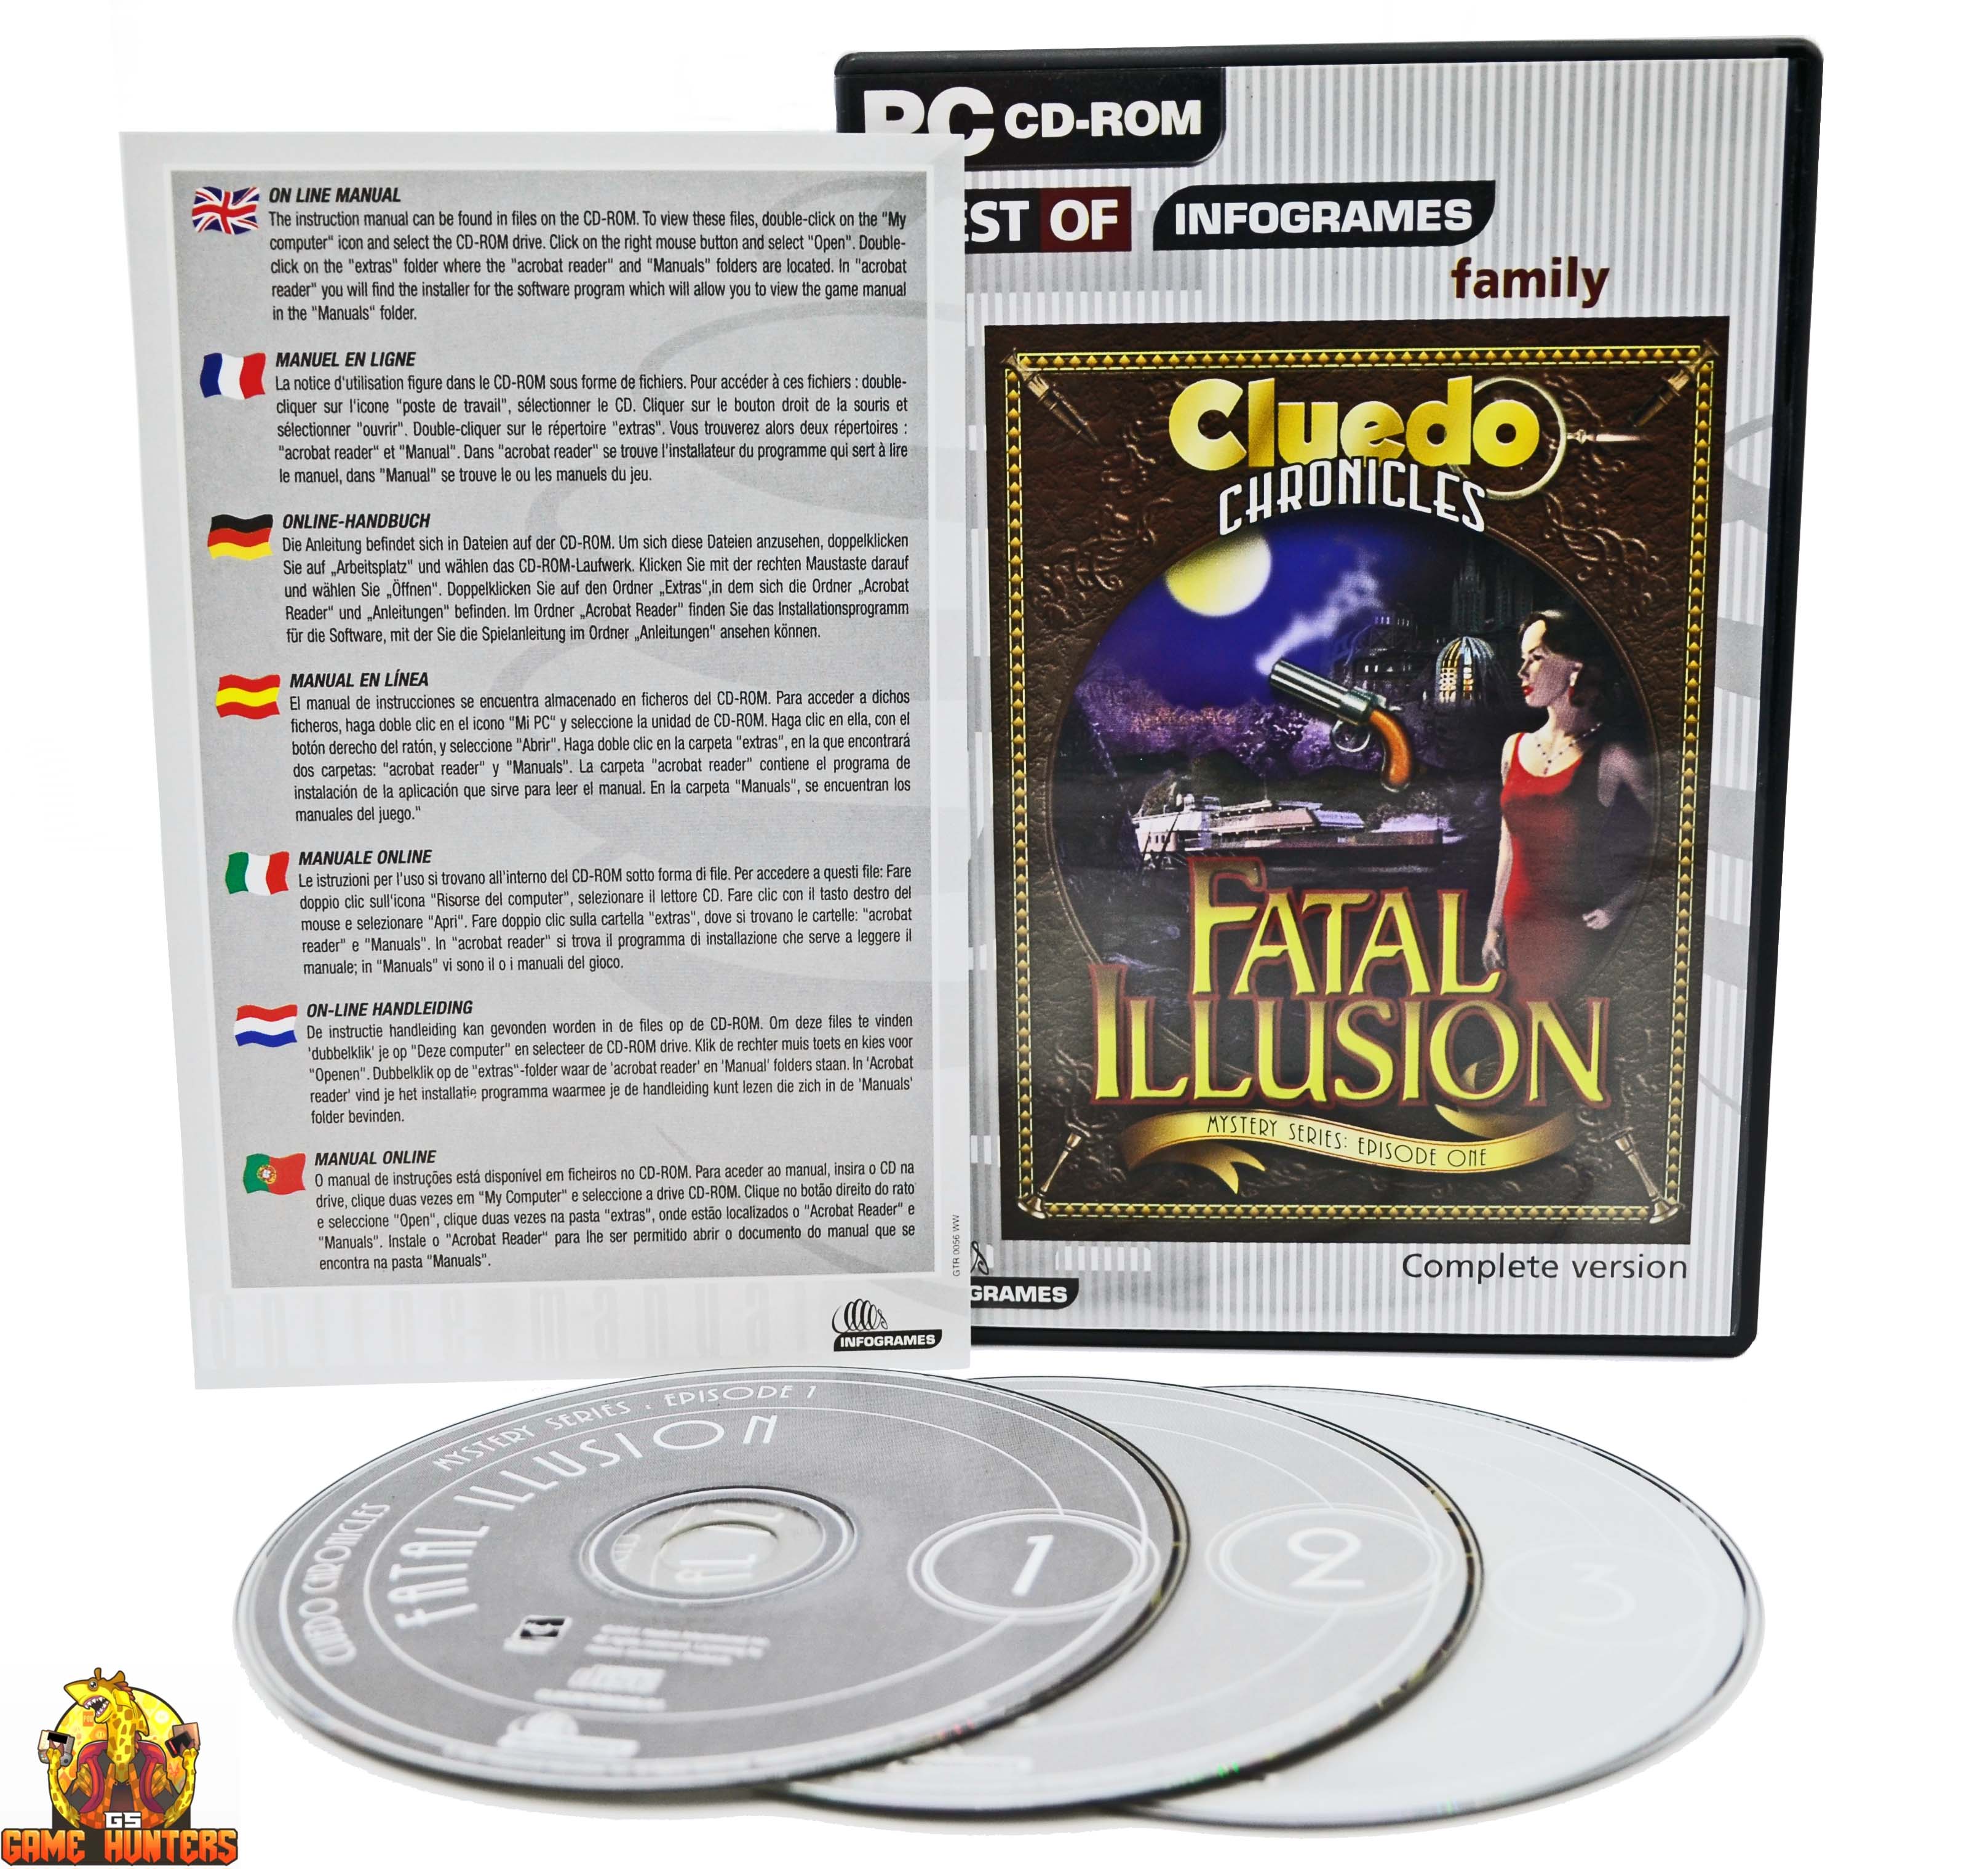 Cluedo Chronicles Fatal Illusion Case, Installation and on line manual access instructions & Discs.jpg  by GSGAMEHUNTERS